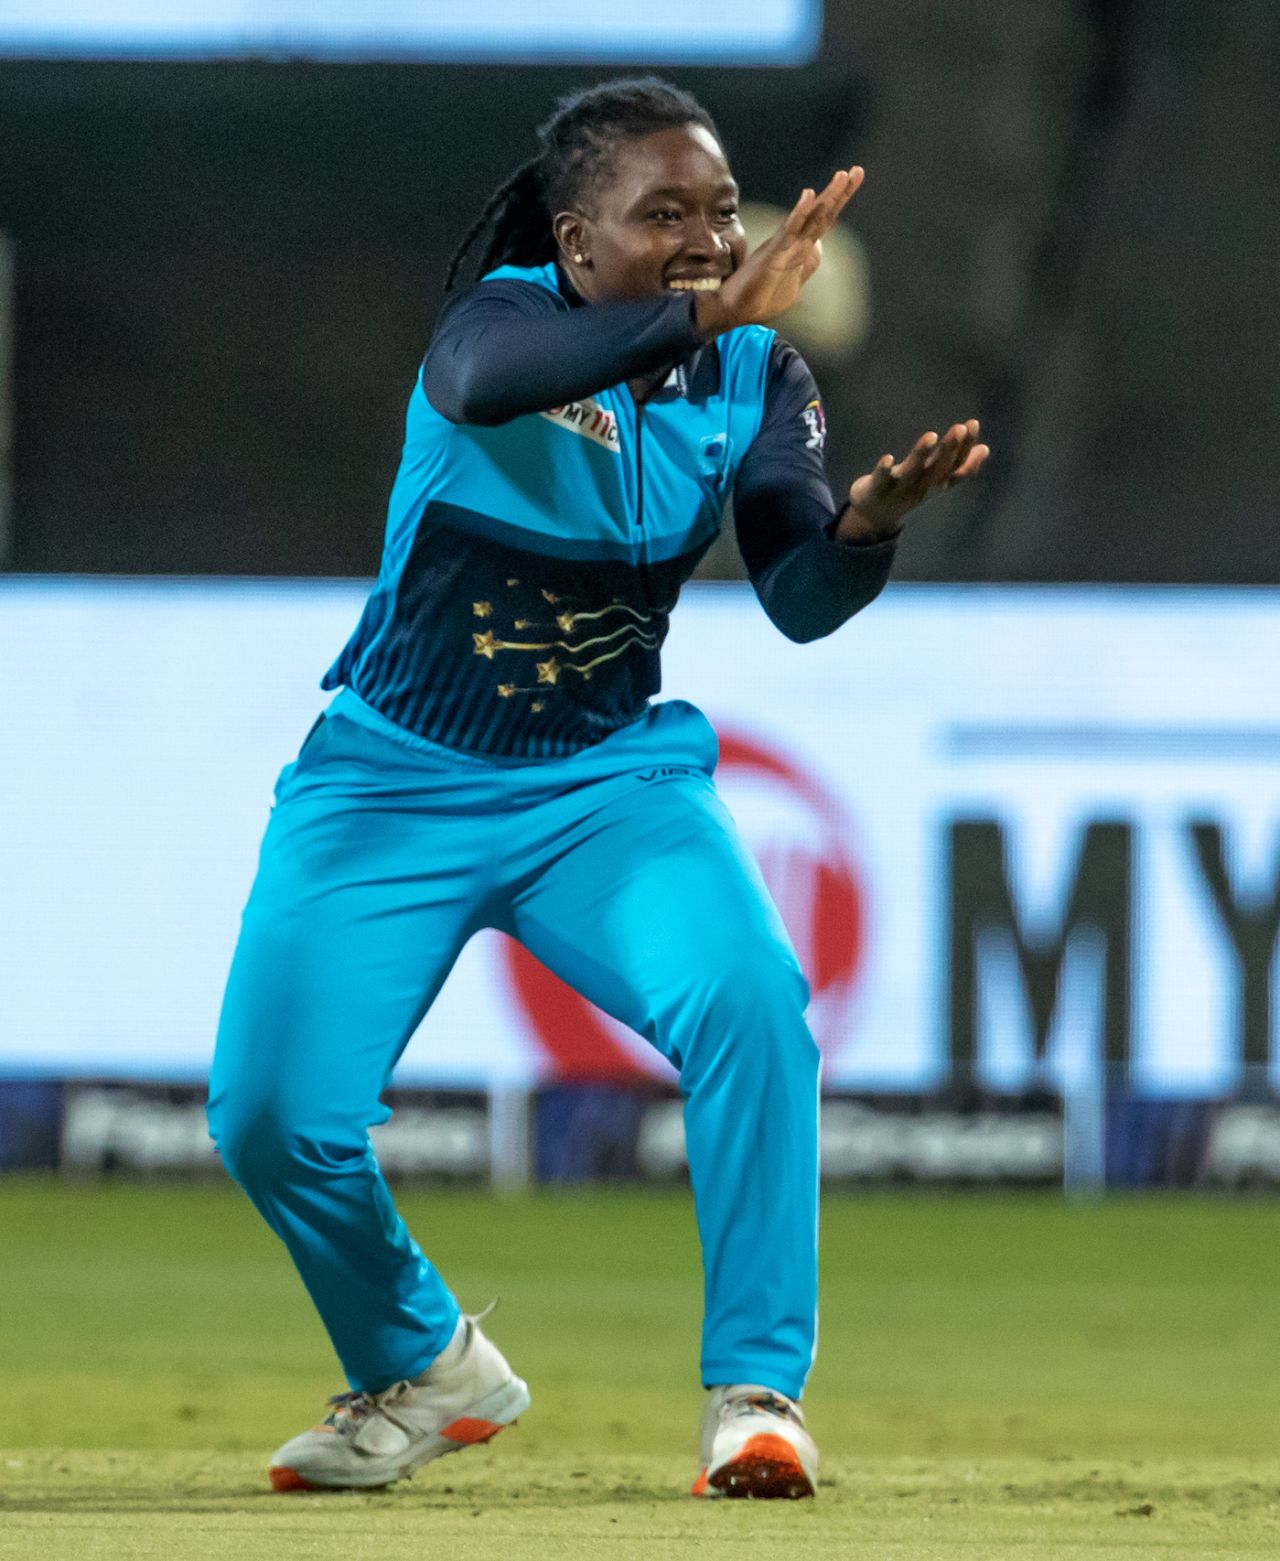 Deandra Dottin is ecstatic after picking up the wicket of Shafali Verma, Supernovas vs Velocity, Final, Women's T20 Challenge 2022, Pune, May 28, 2022